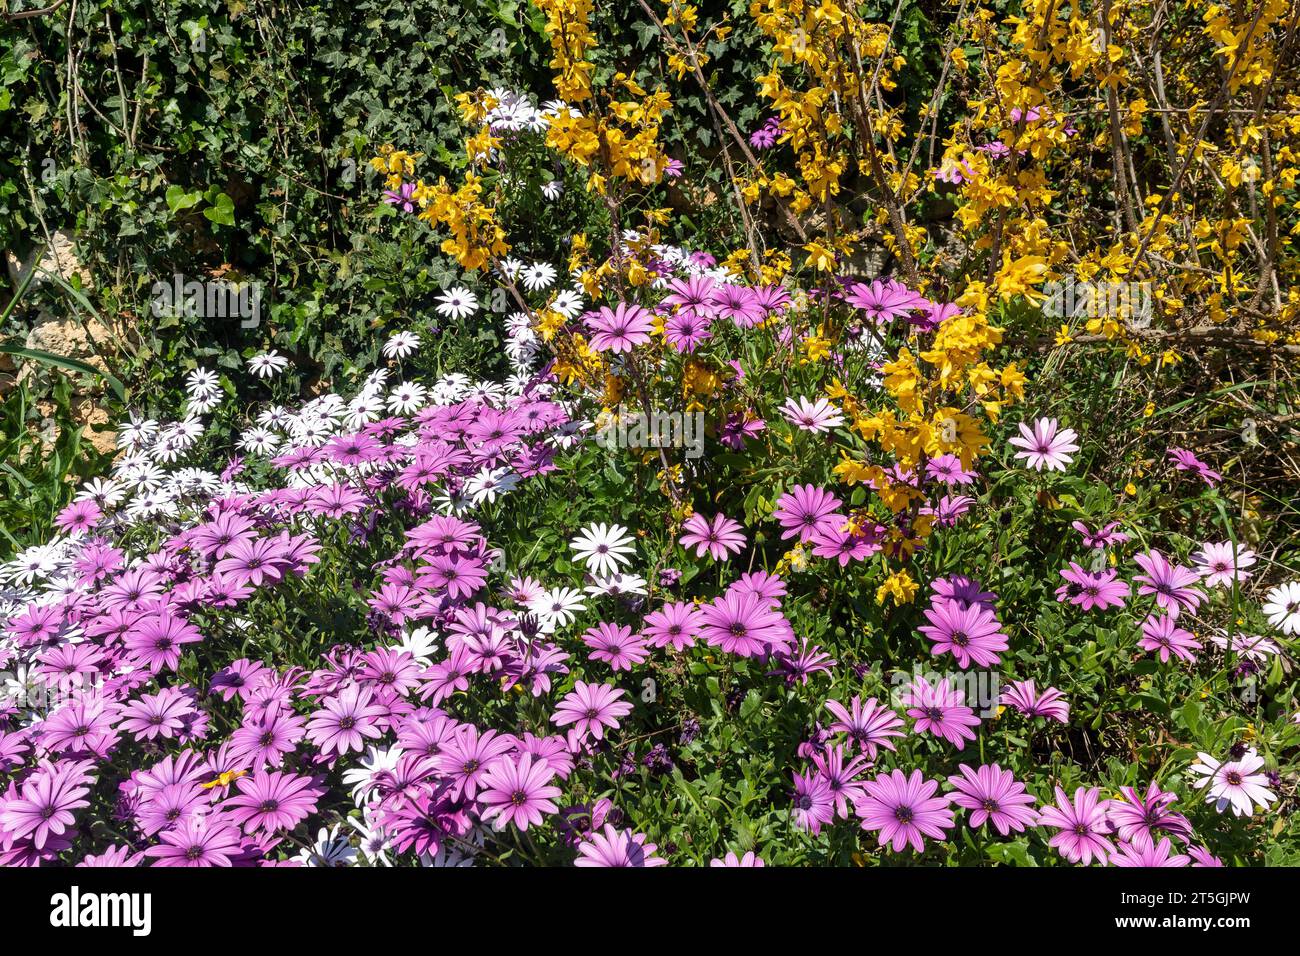 Flowering plants of pink African daisy (Dimorphotheca) and yellow forsythia with a climbing ivy in the background in spring, Savona, Liguria, Italy Stock Photo